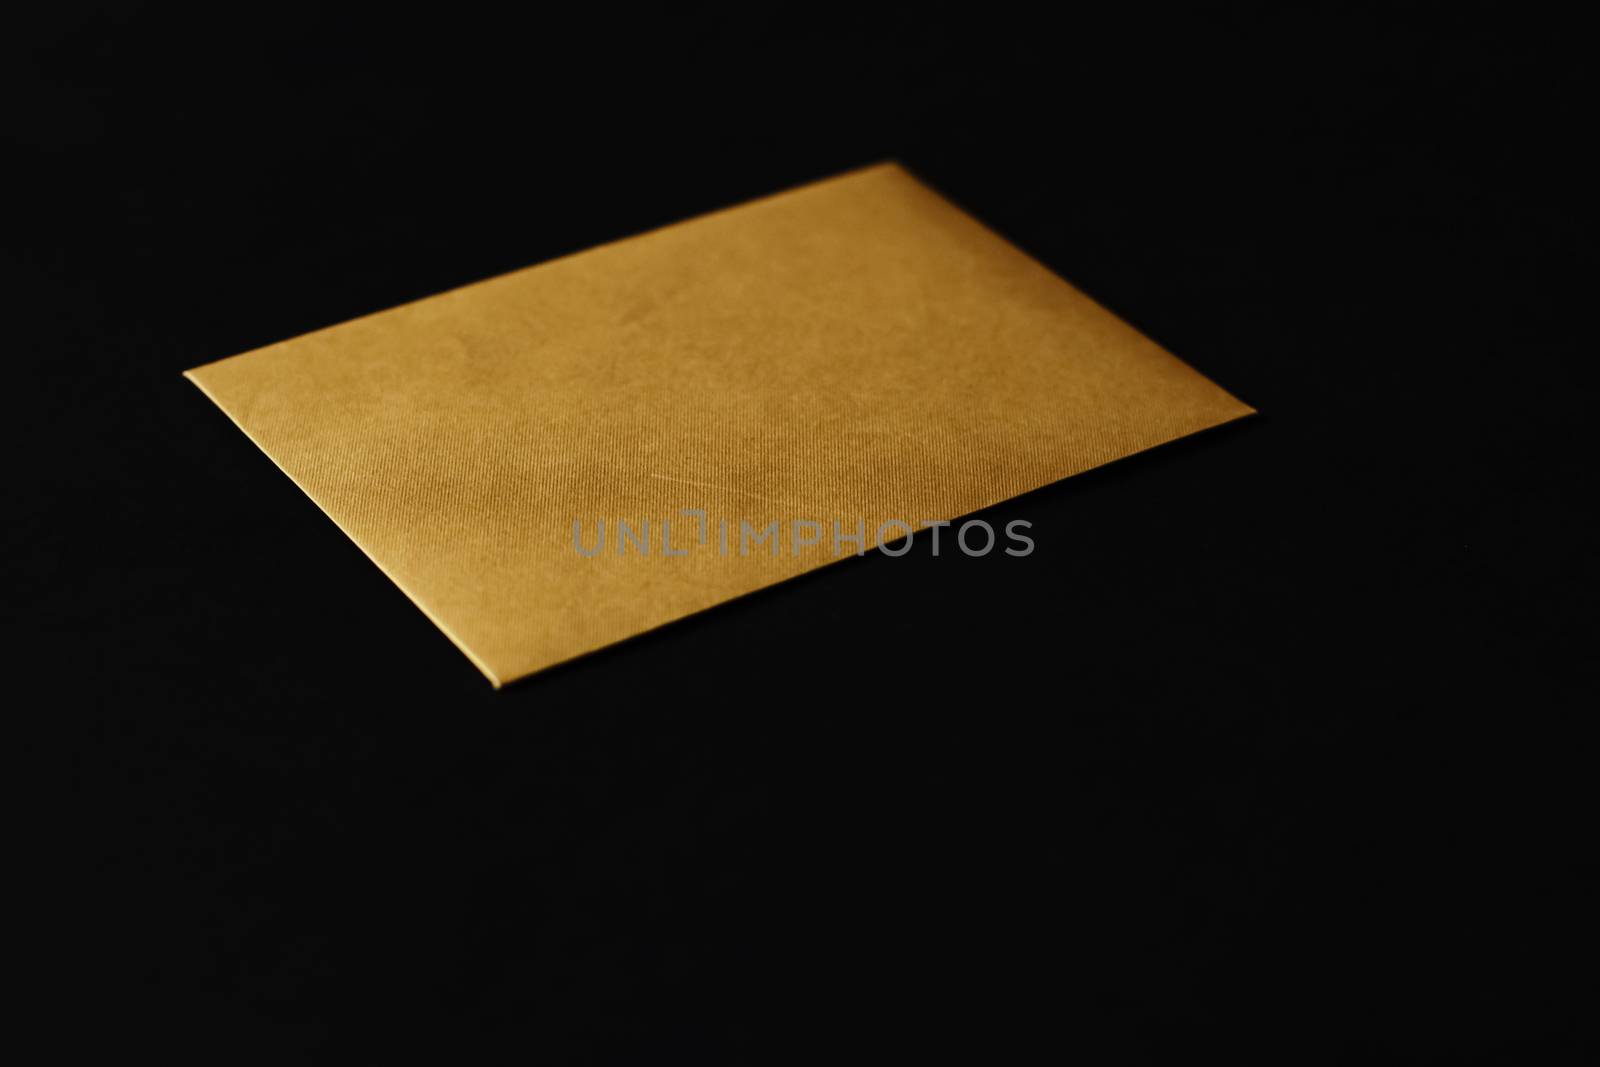 Blank golden paper card on black background, premium business and luxury brand identity mockup